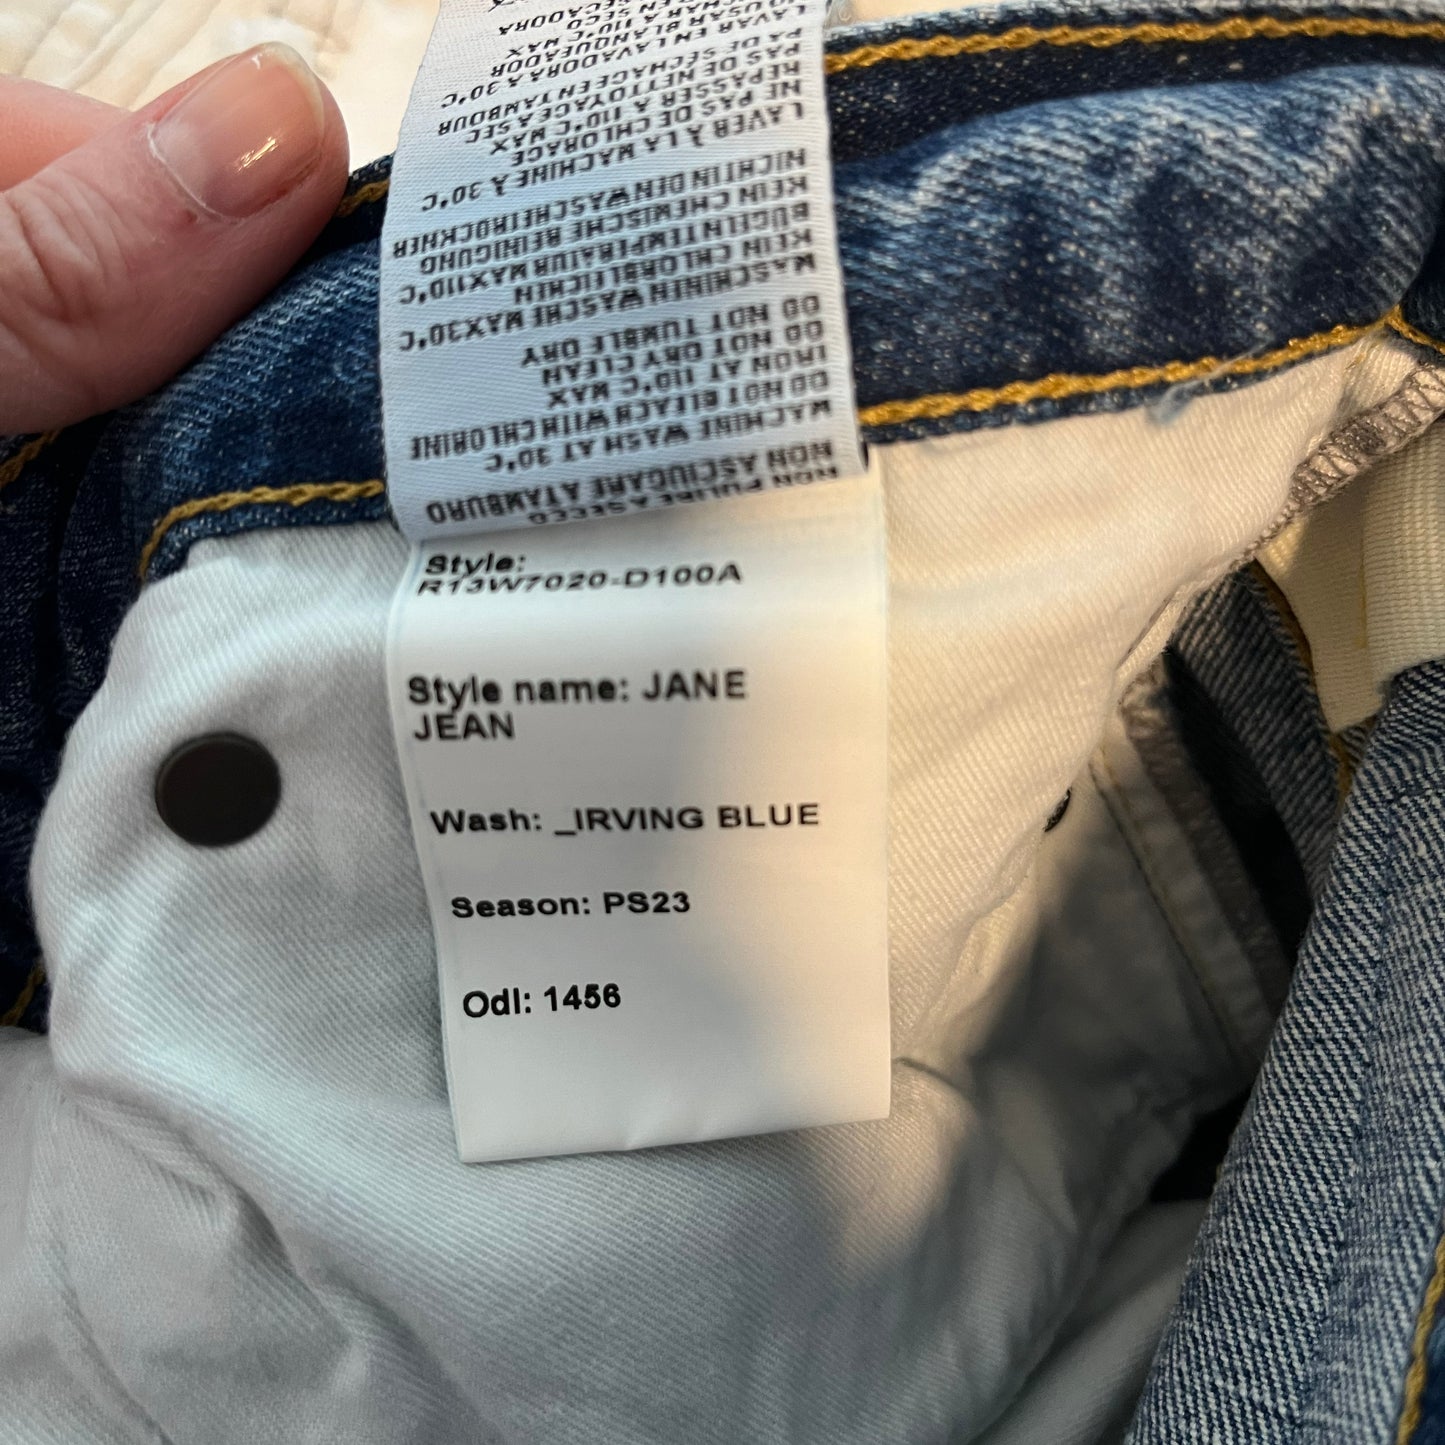 R13 "Jane" Jeans in Irving Blue, size 31